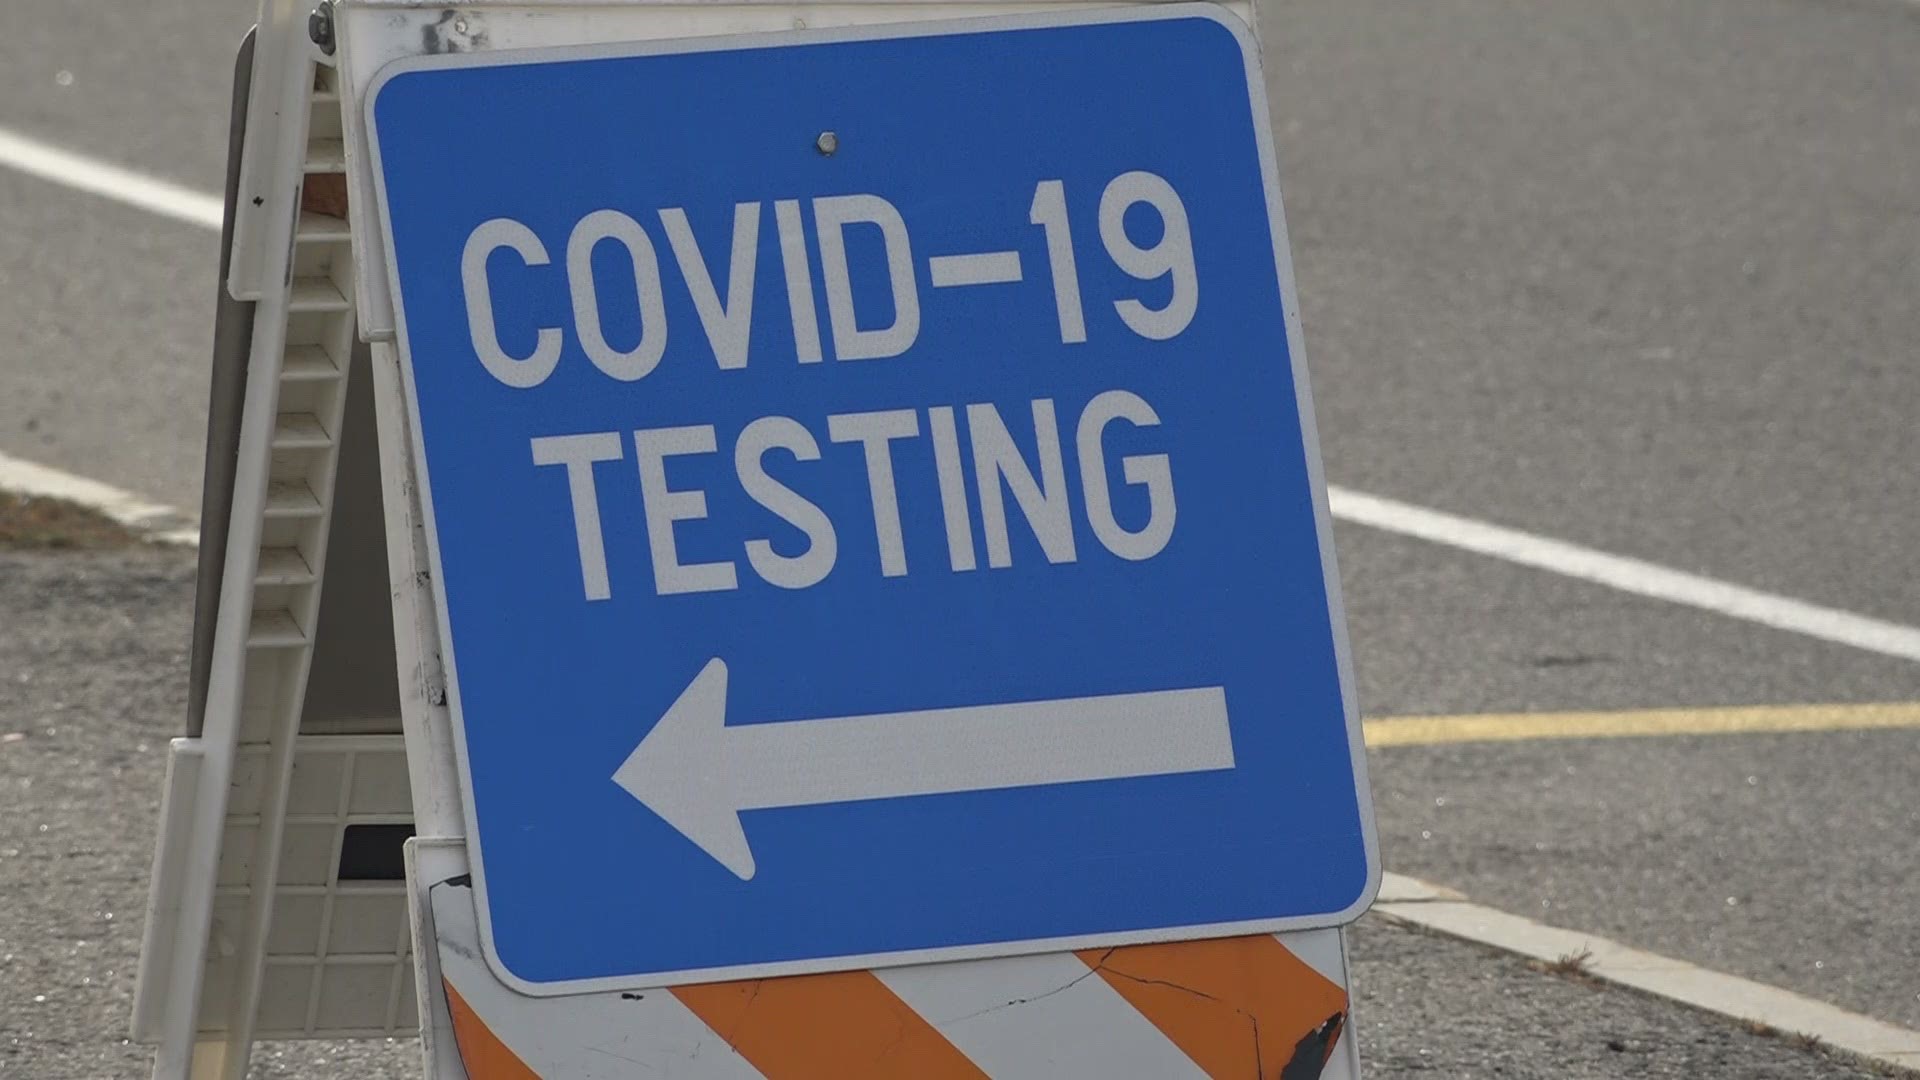 As coronavirus cases continue to rise in Maine, testing sites have seen a 50 percent increase in testing volume statewide according the the Maine CDC.